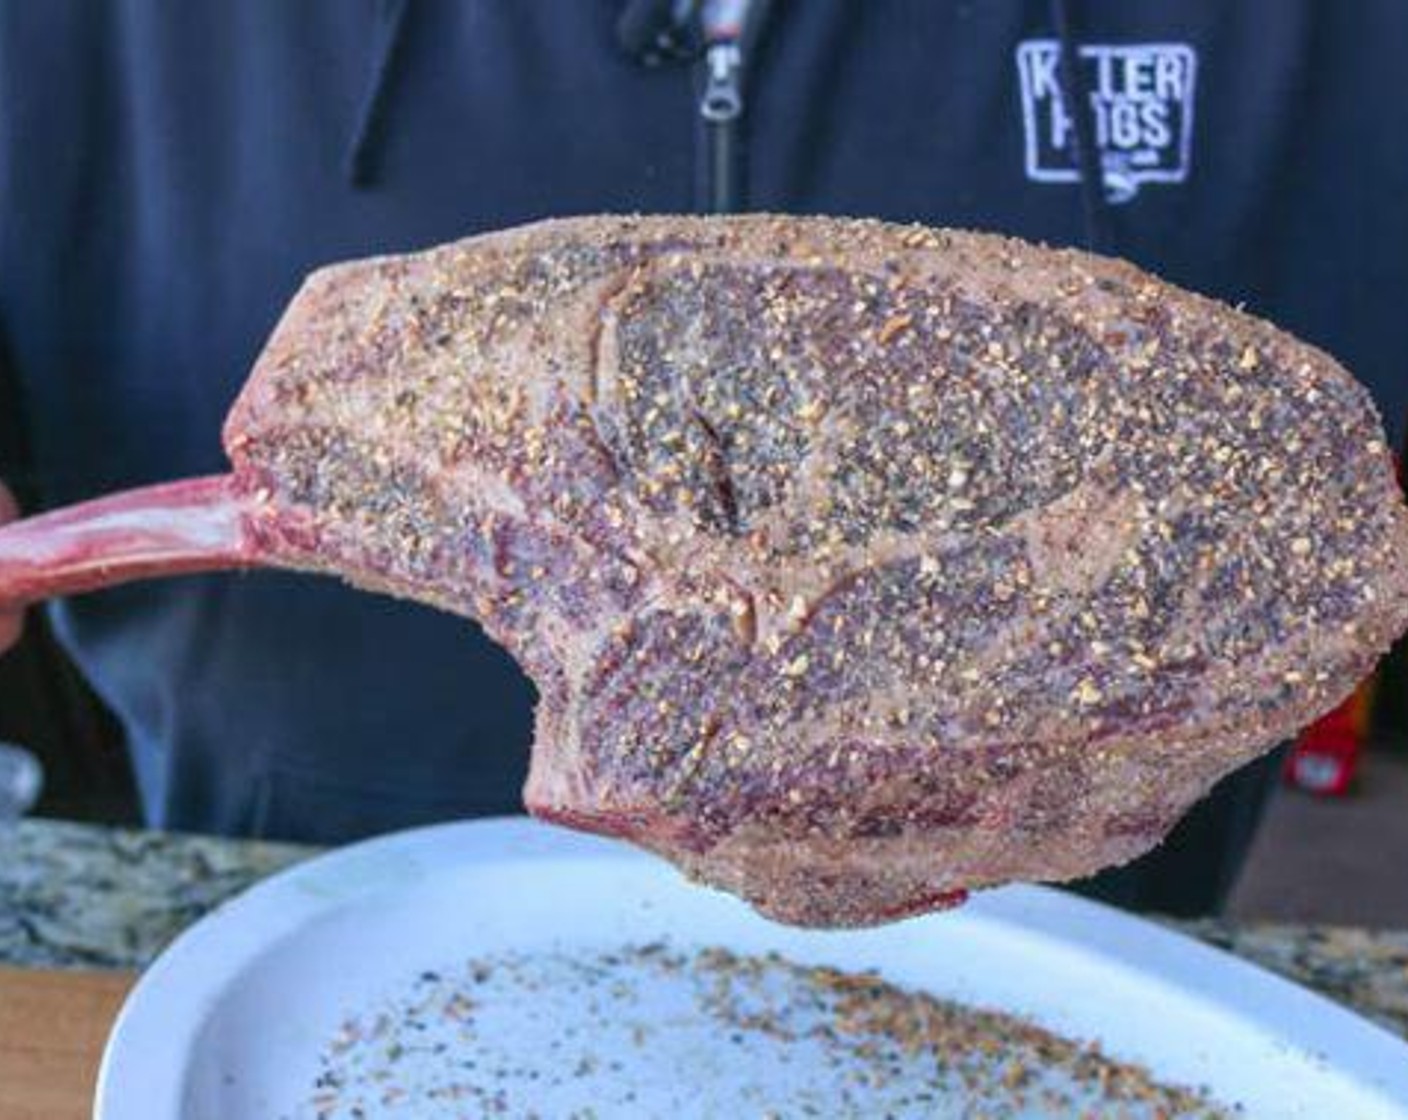 step 1 Apply a medium to heavy coat of All-Purpose Spice Rub (2 Tbsp) or your favorite seasoning to all sides of the Bone-in Ribeye Steak (3 lb) and rest for 30 minutes at room temperature.